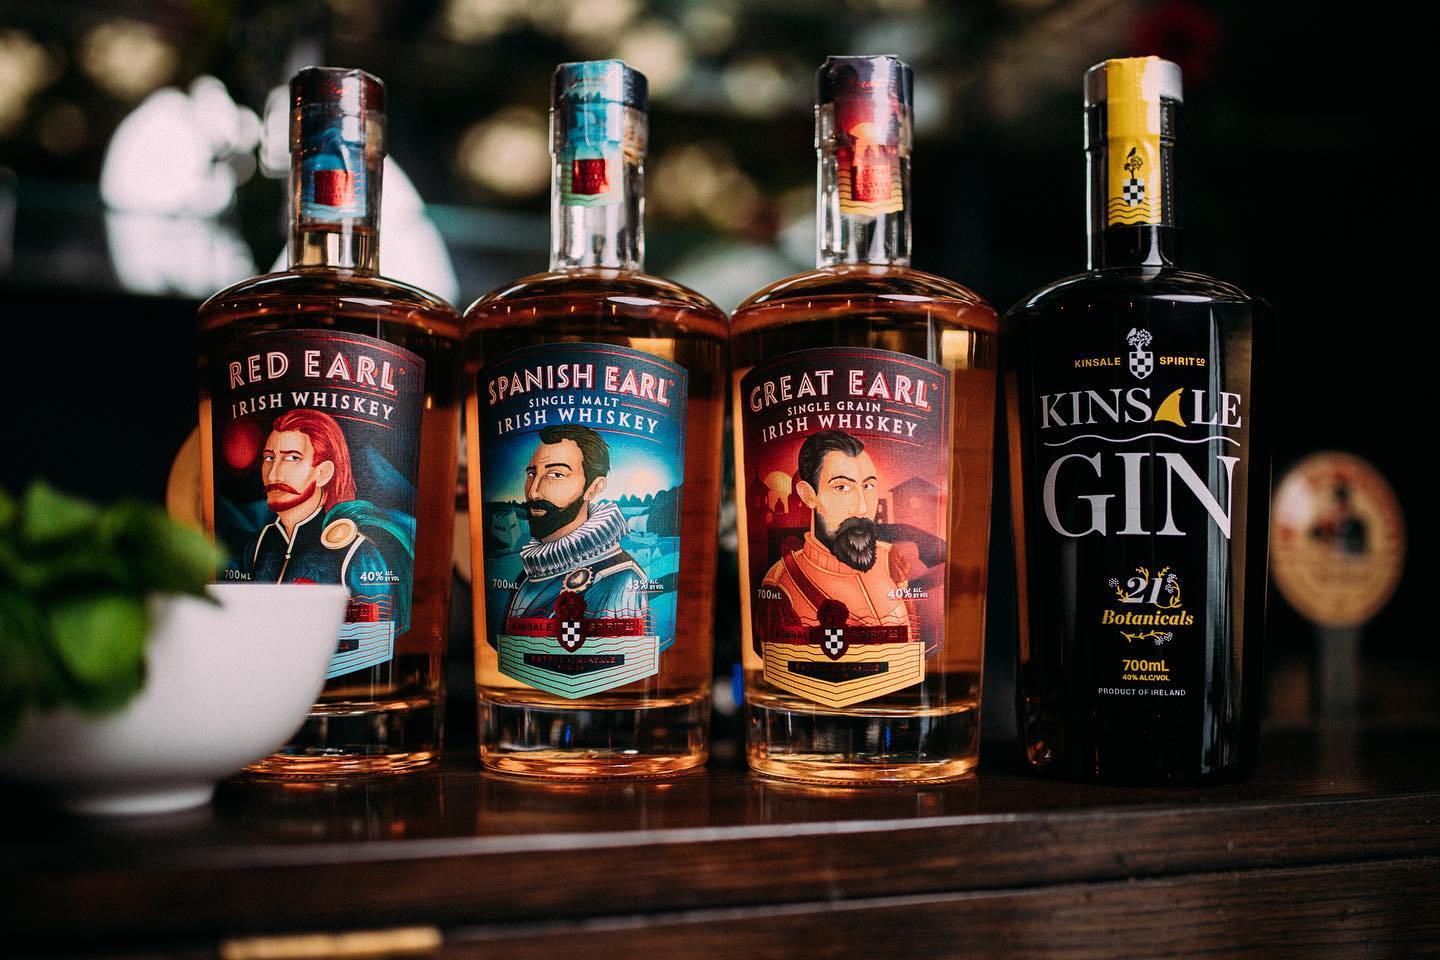 ☘️ Check out our website and learn more about our growing range of spirits here at Kinsale Spirit Co.

Red Earl Irish Whiskey #Blended
Great Earl Irish Whiskey #SingleGrain 
Spanish Earl Irish Whiskey #SingleMalt
Triumvirate #BattleofKinsaleSeries
Kinsale Gin #21botanicals 

#drinkresponsibly - www.kinsalespirit.com